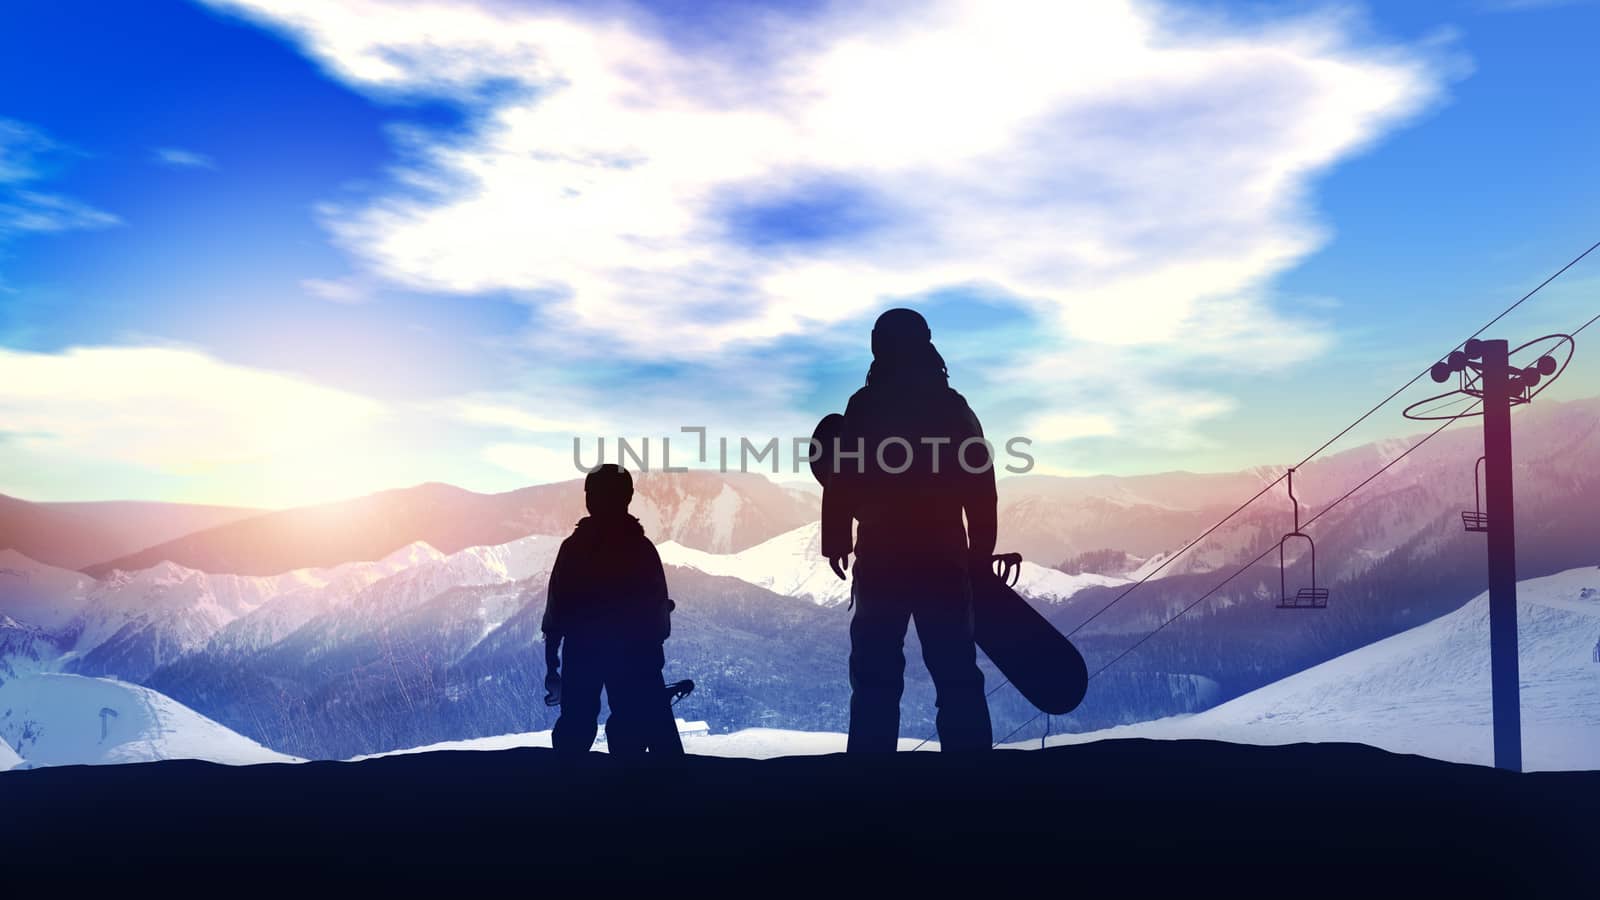 Silhouettes of a family with snowboards against the background of snow-capped peaks.